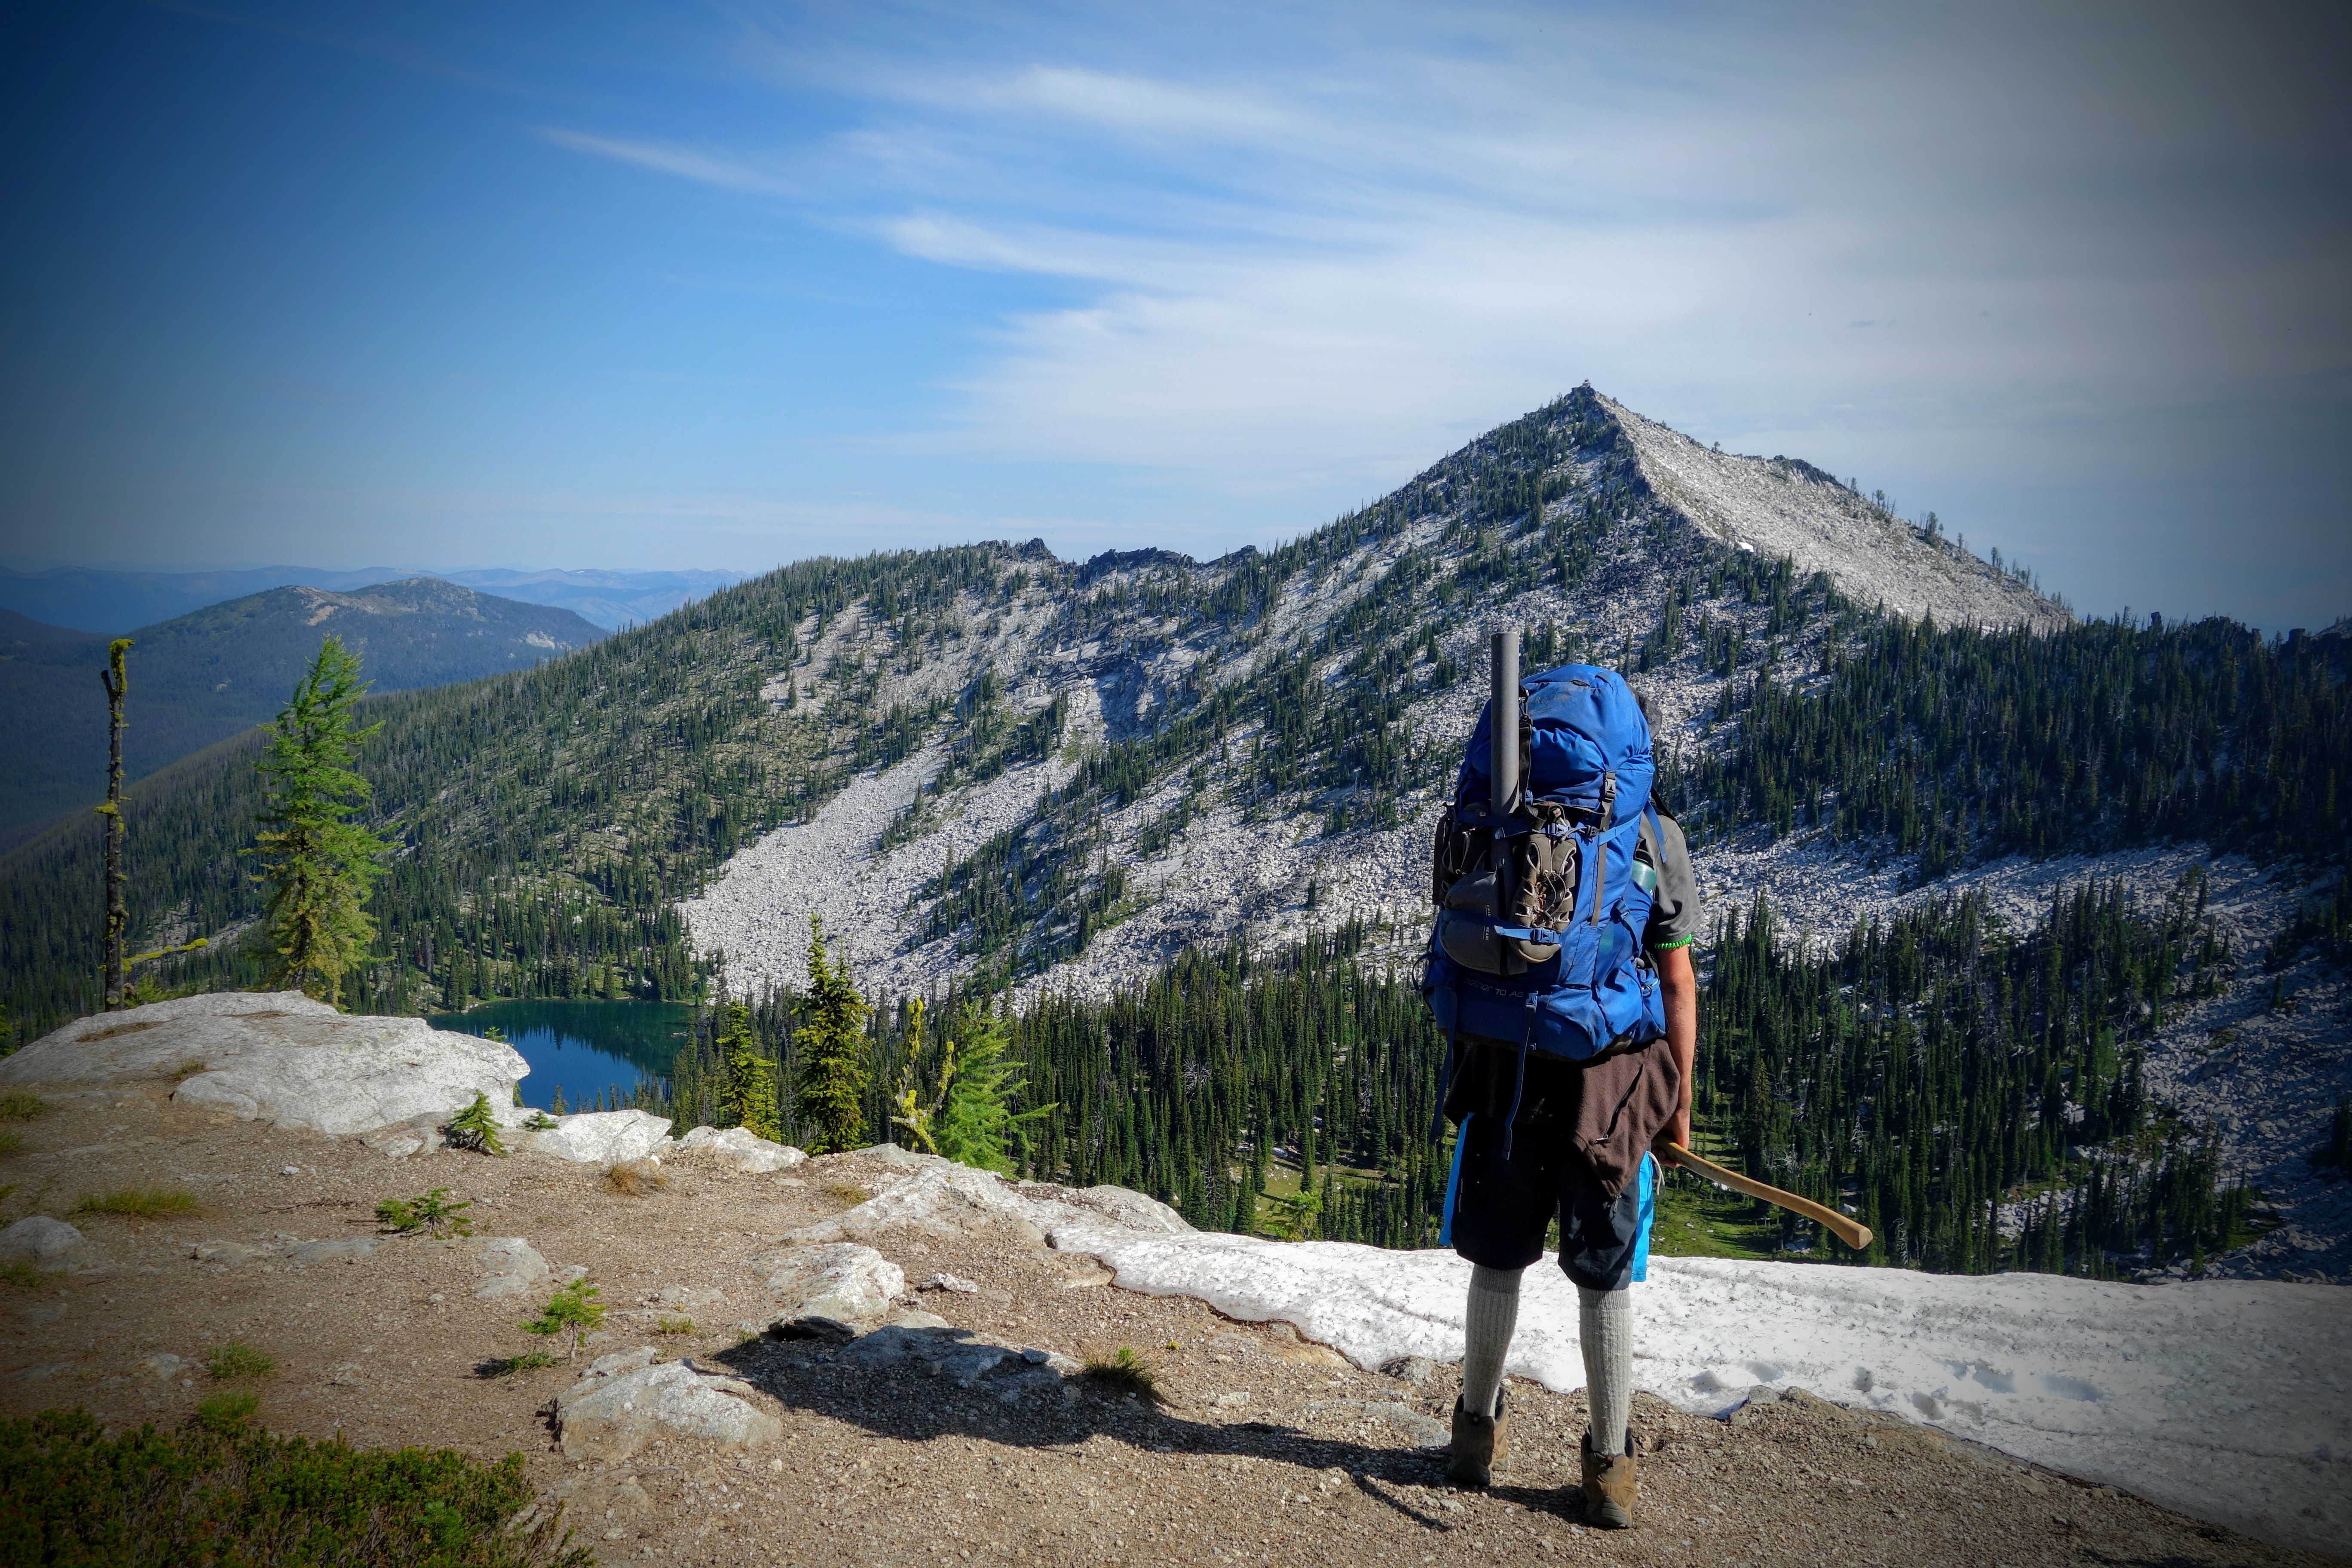 A student with a backpack on stands on the trail facing a mountain vista in the distance.